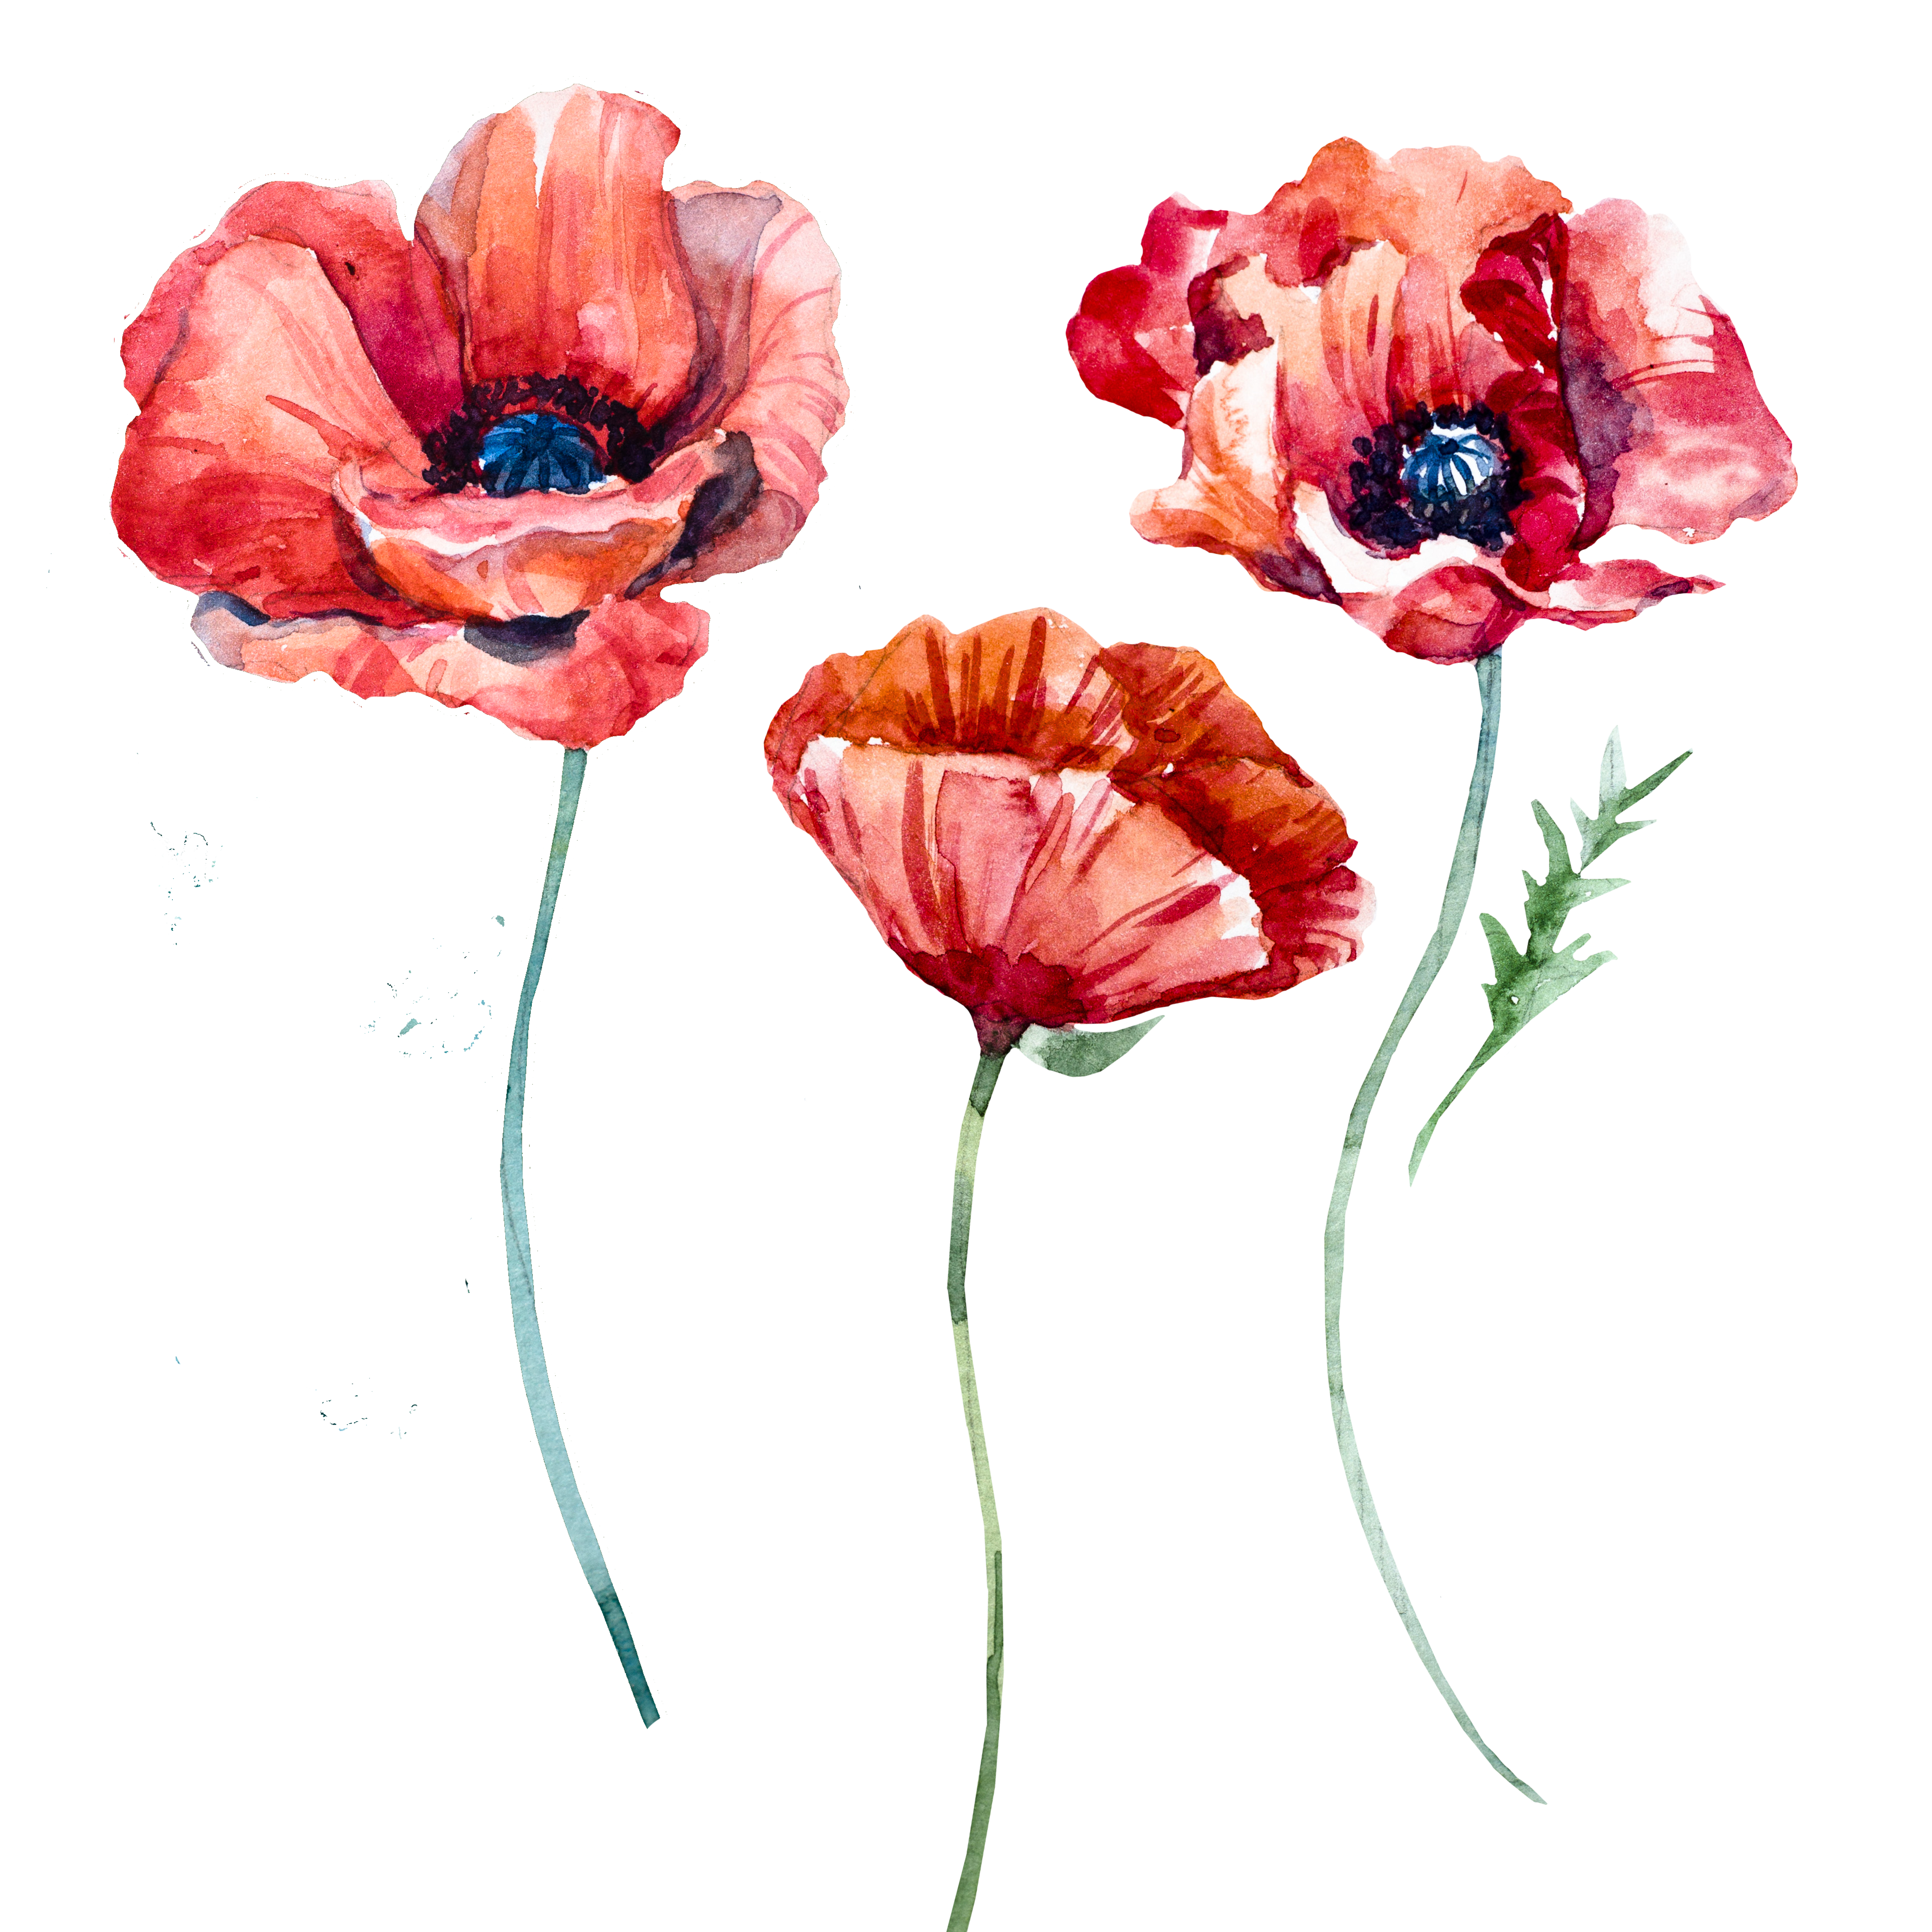 Free pictures of poppies. Poppy flower png